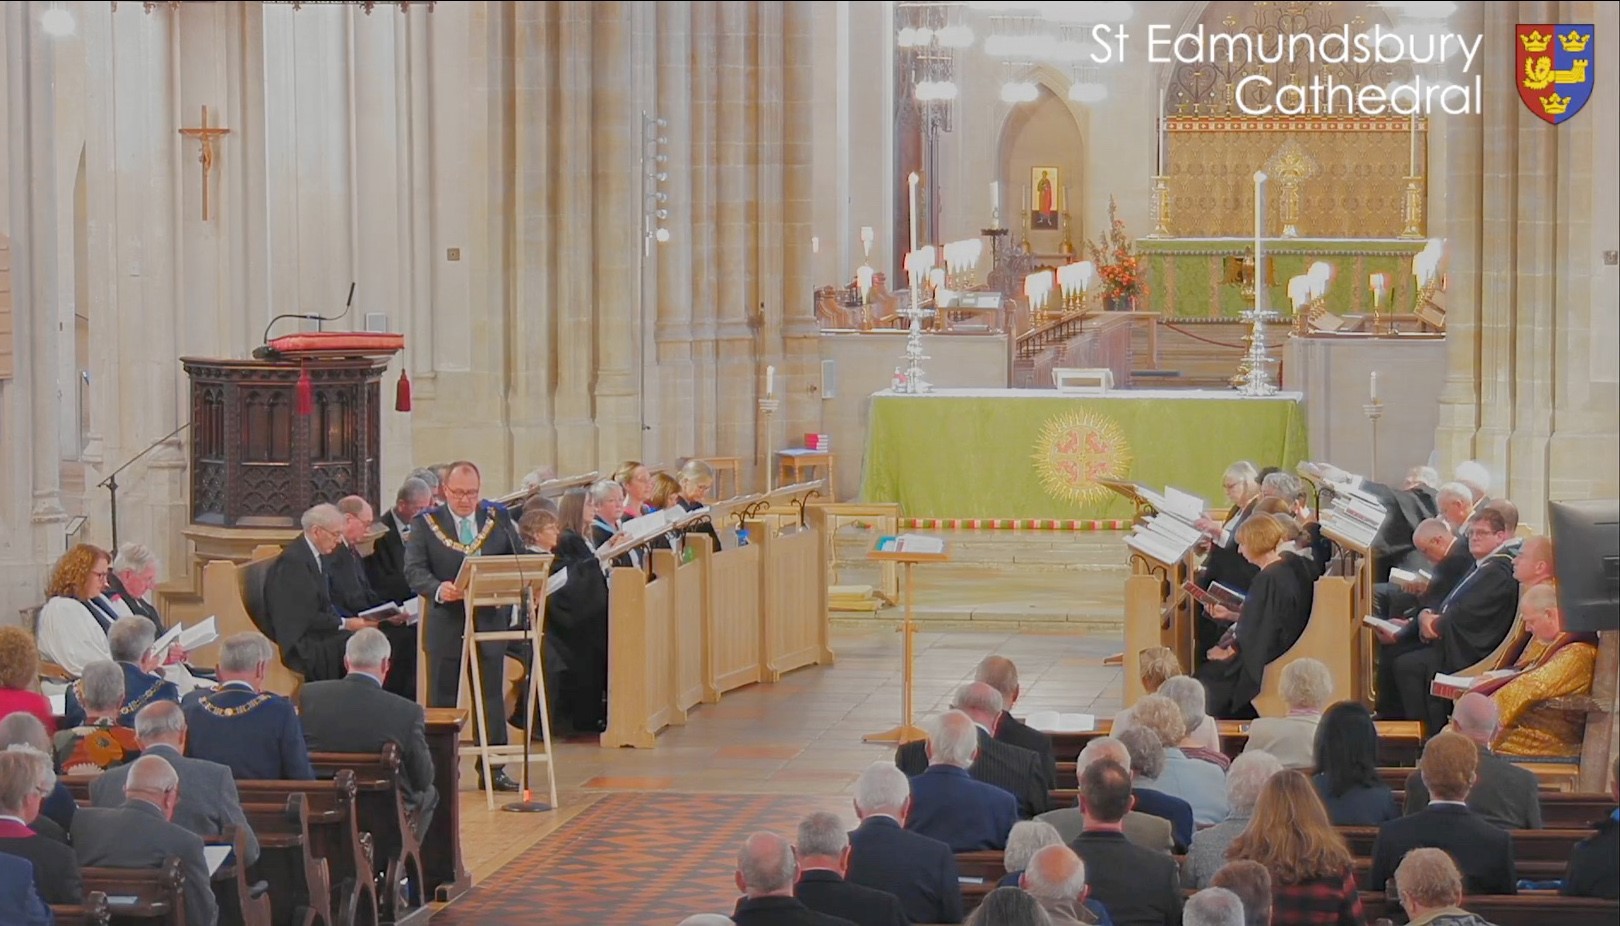 Provincial Grand Master of Suffolk Ian Yeldham delivering the First Reading at St. Edmundsbury Cathedral